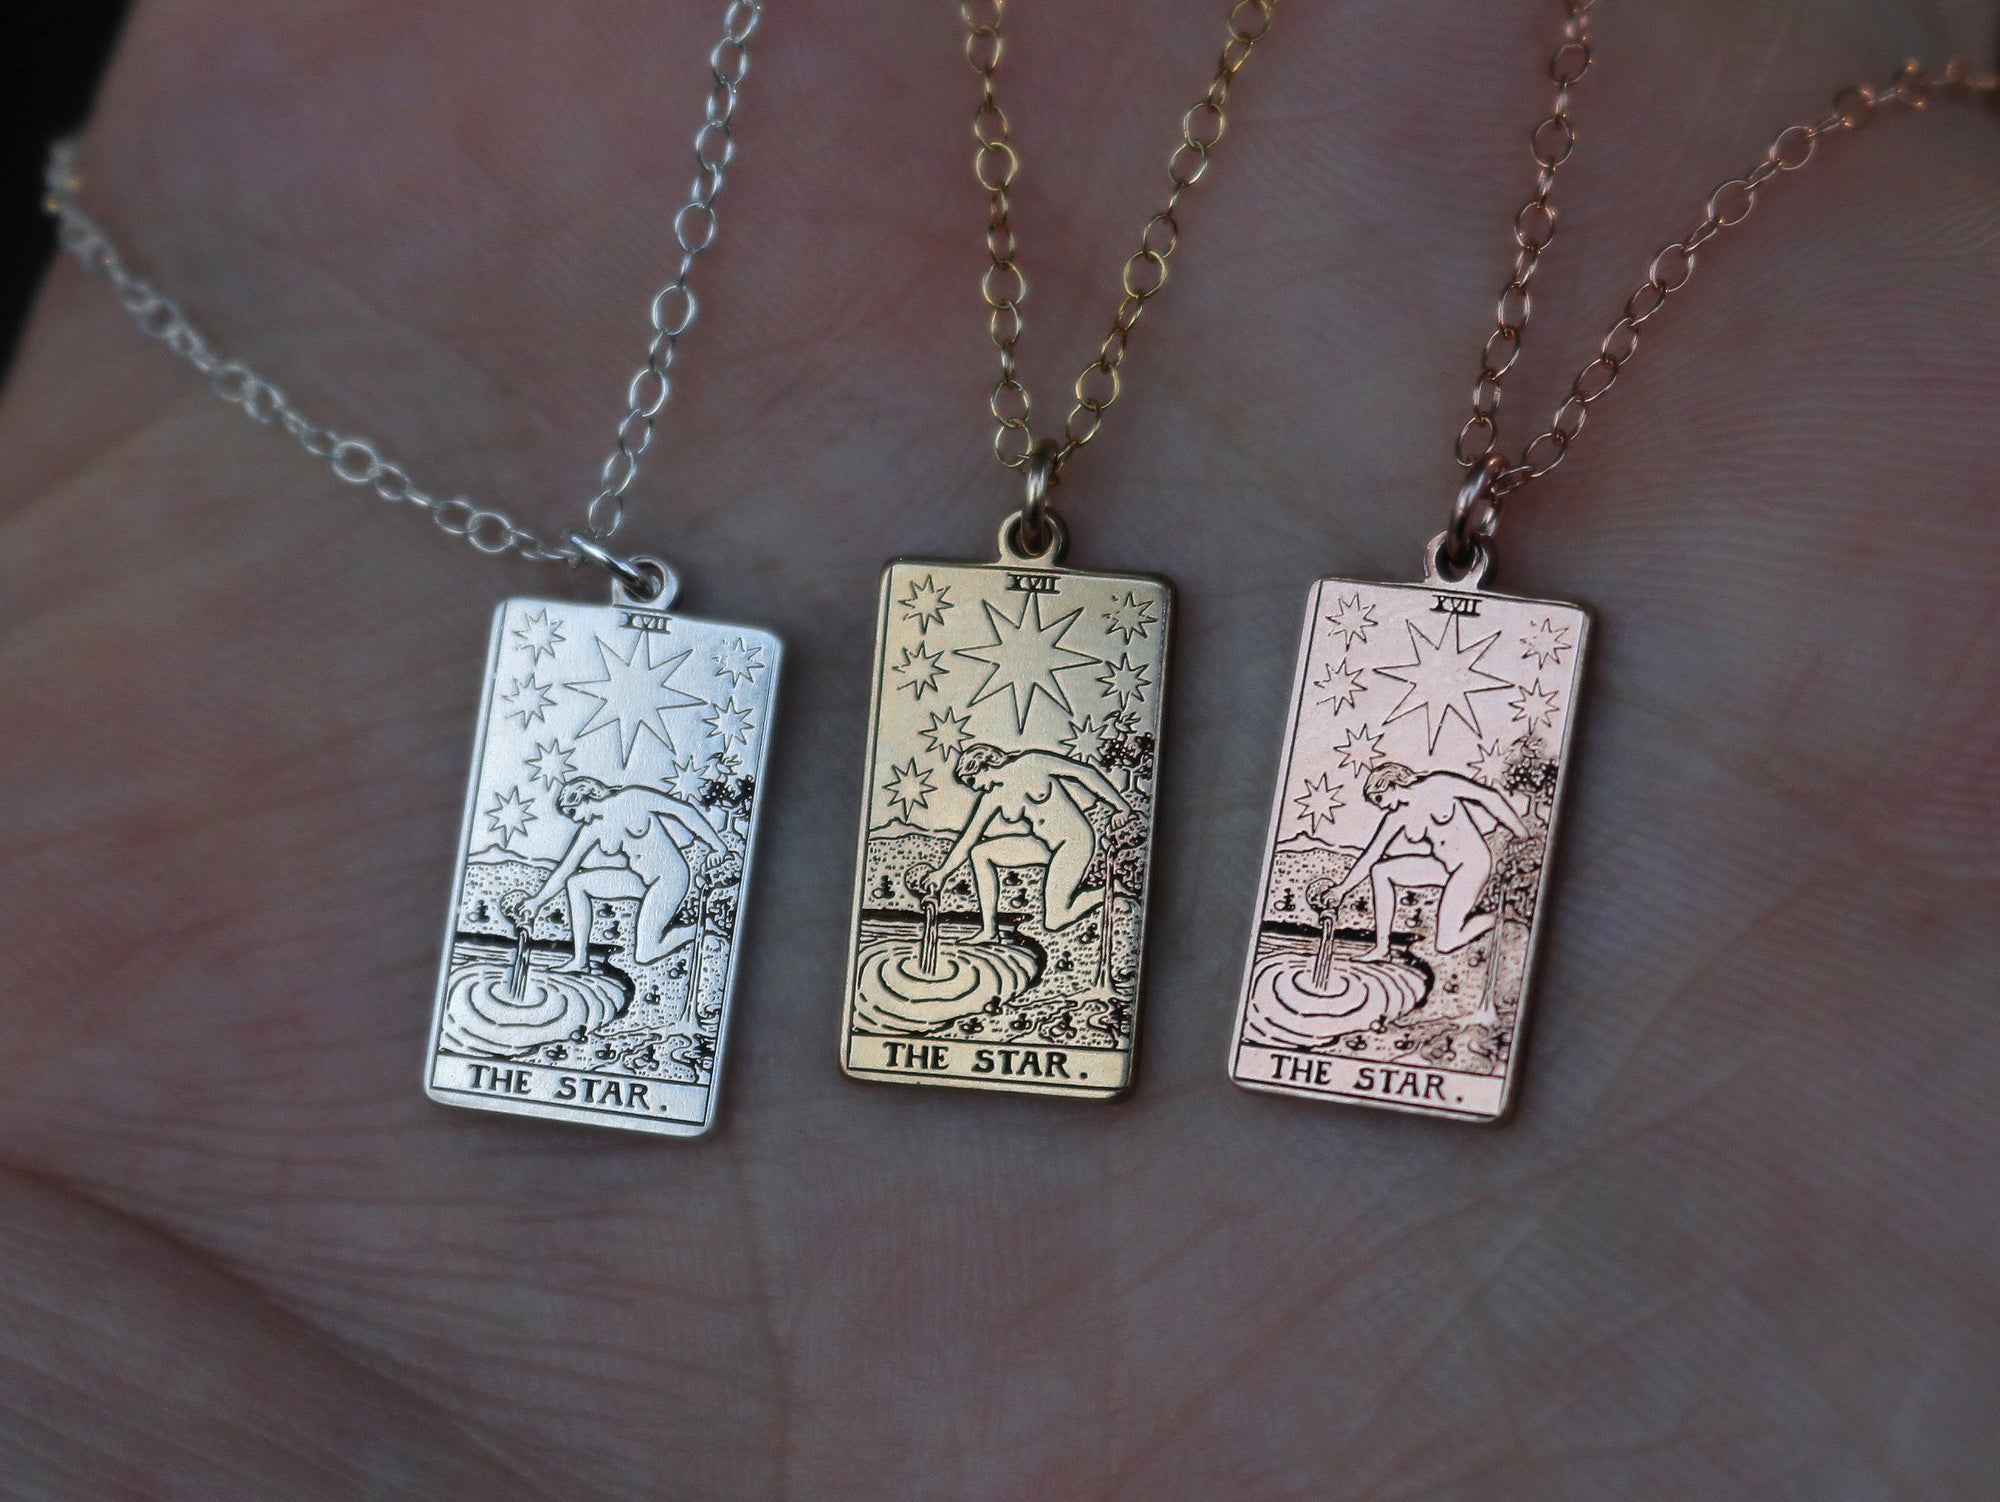 22 CARDS: The Major Arcana Dainty Tarot Card Necklace - Rose Gold Filled